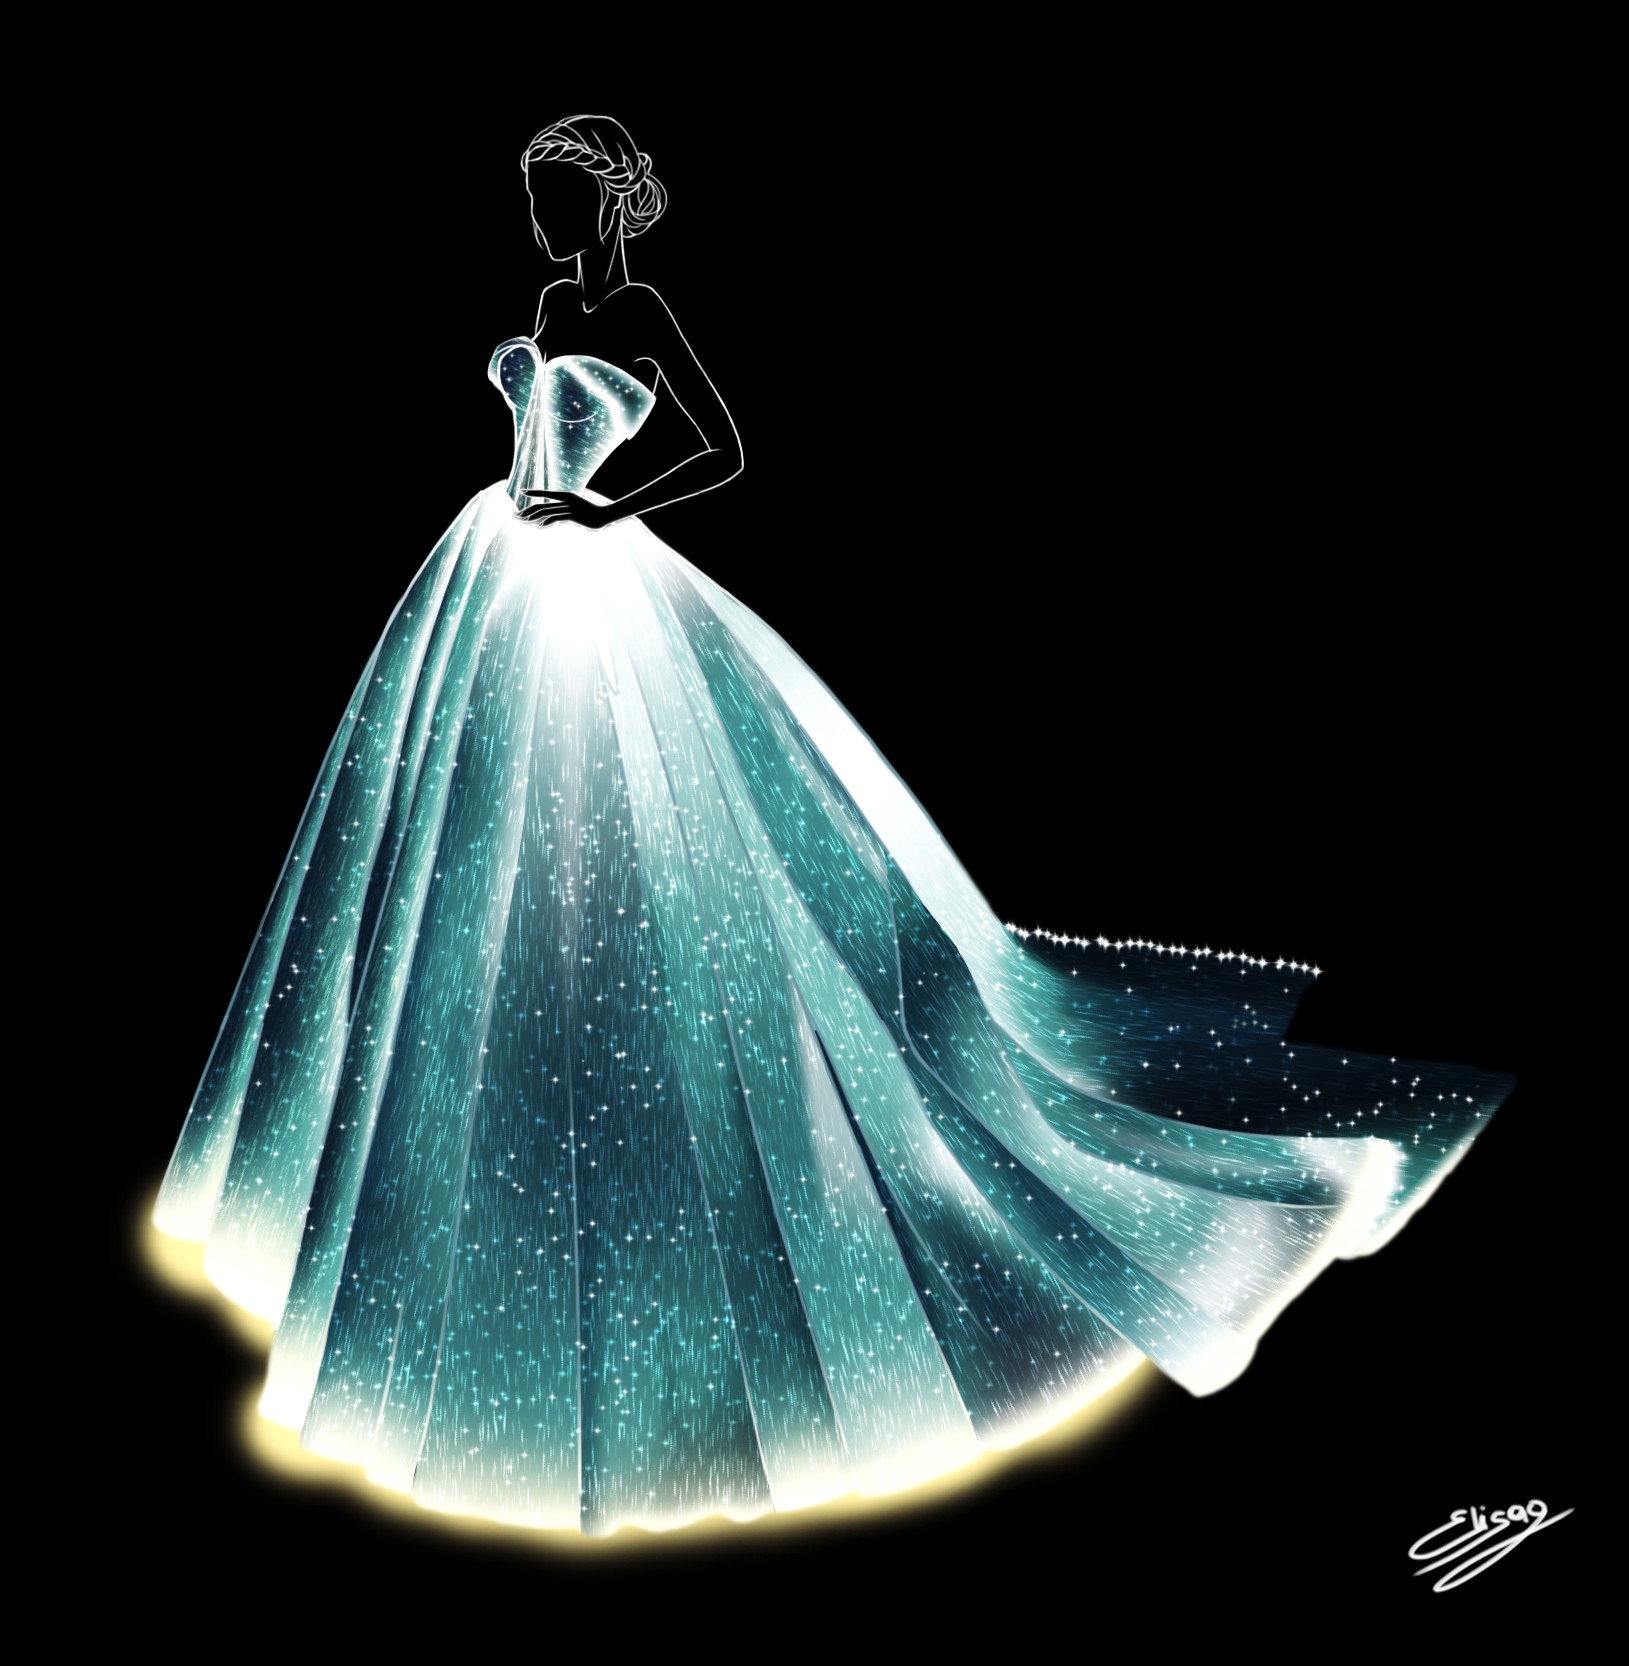 Zac Posen x GE Additive x Protolabs unveil breathtaking 3D printing  collaboration at the Met Gala | GE Additive